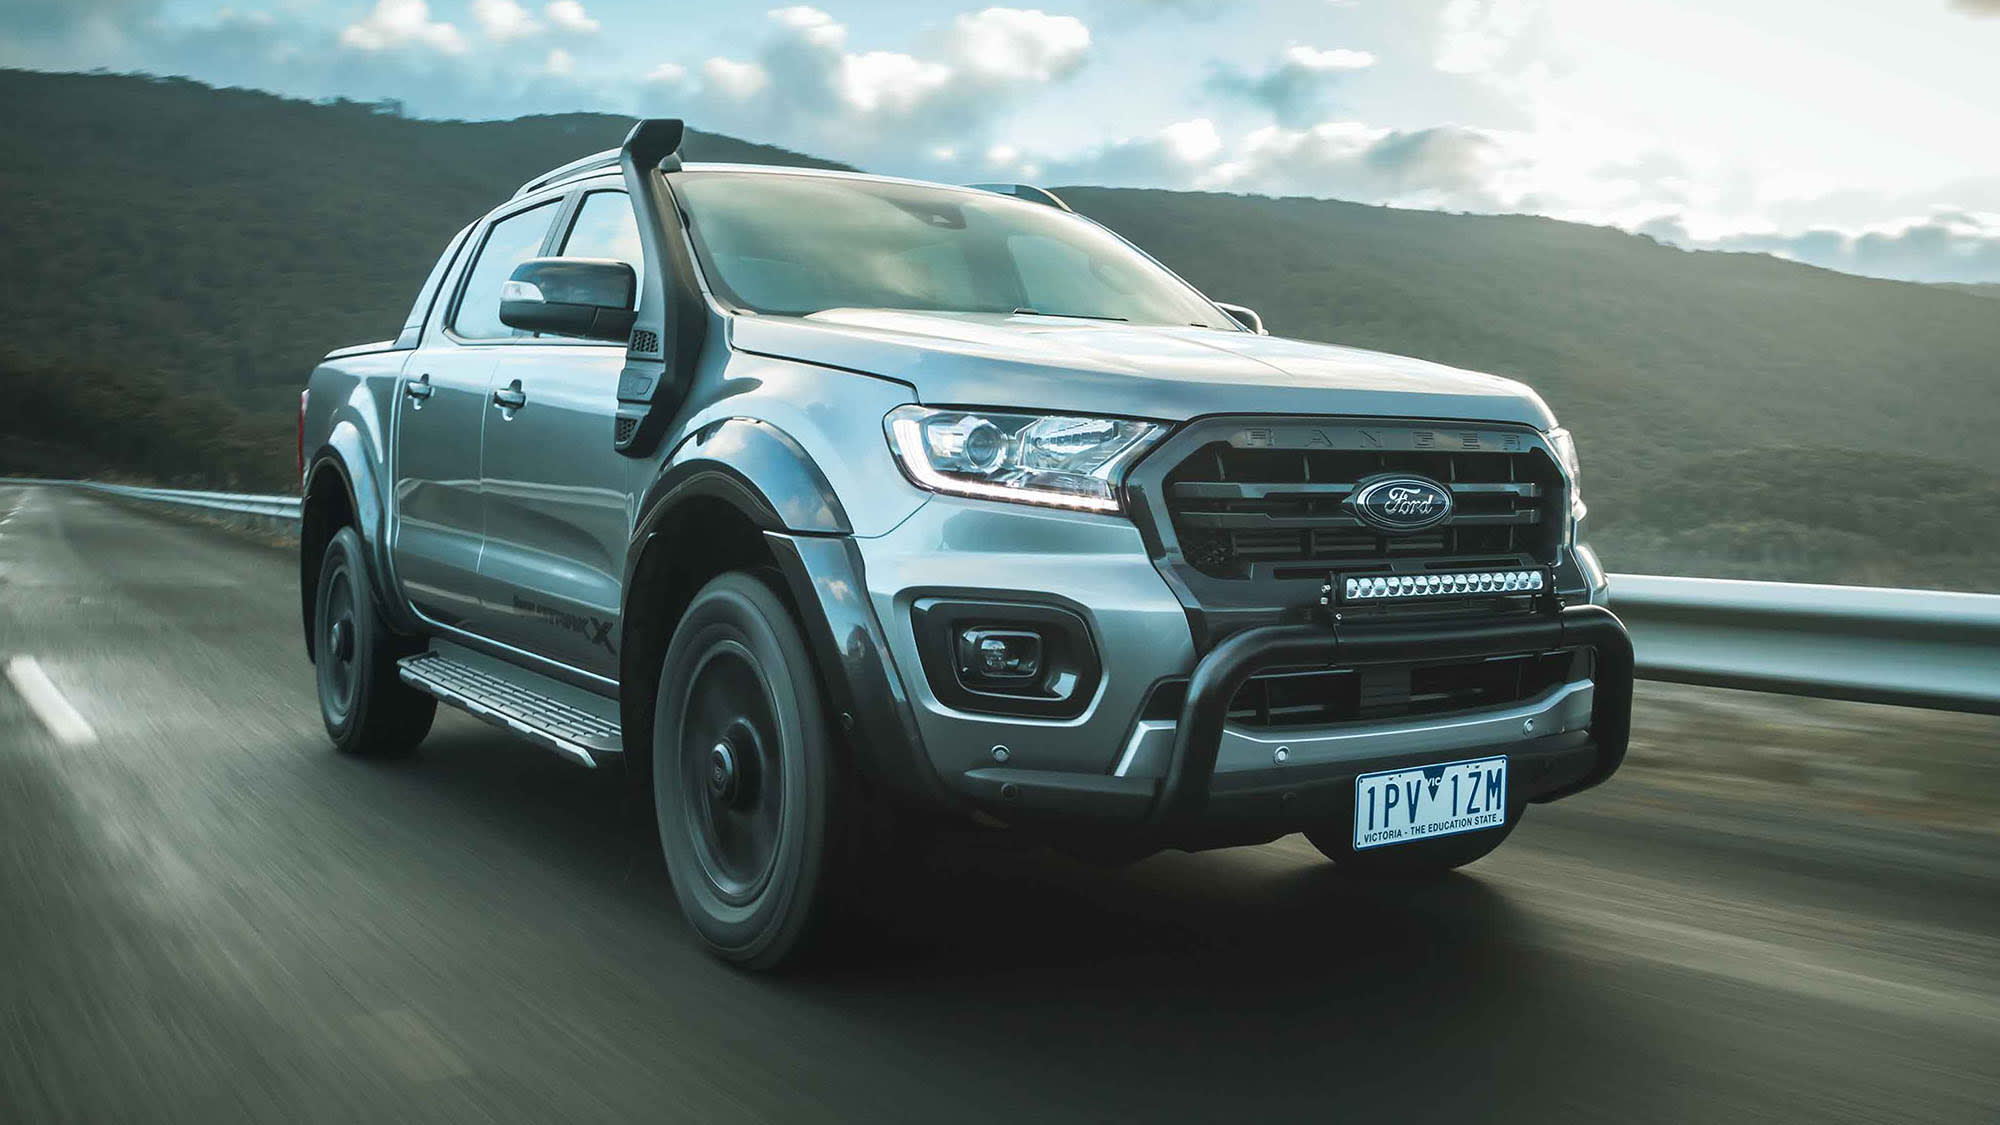 2019 Ford Ranger Xlt 20 4x4 Auto Review Caradvice